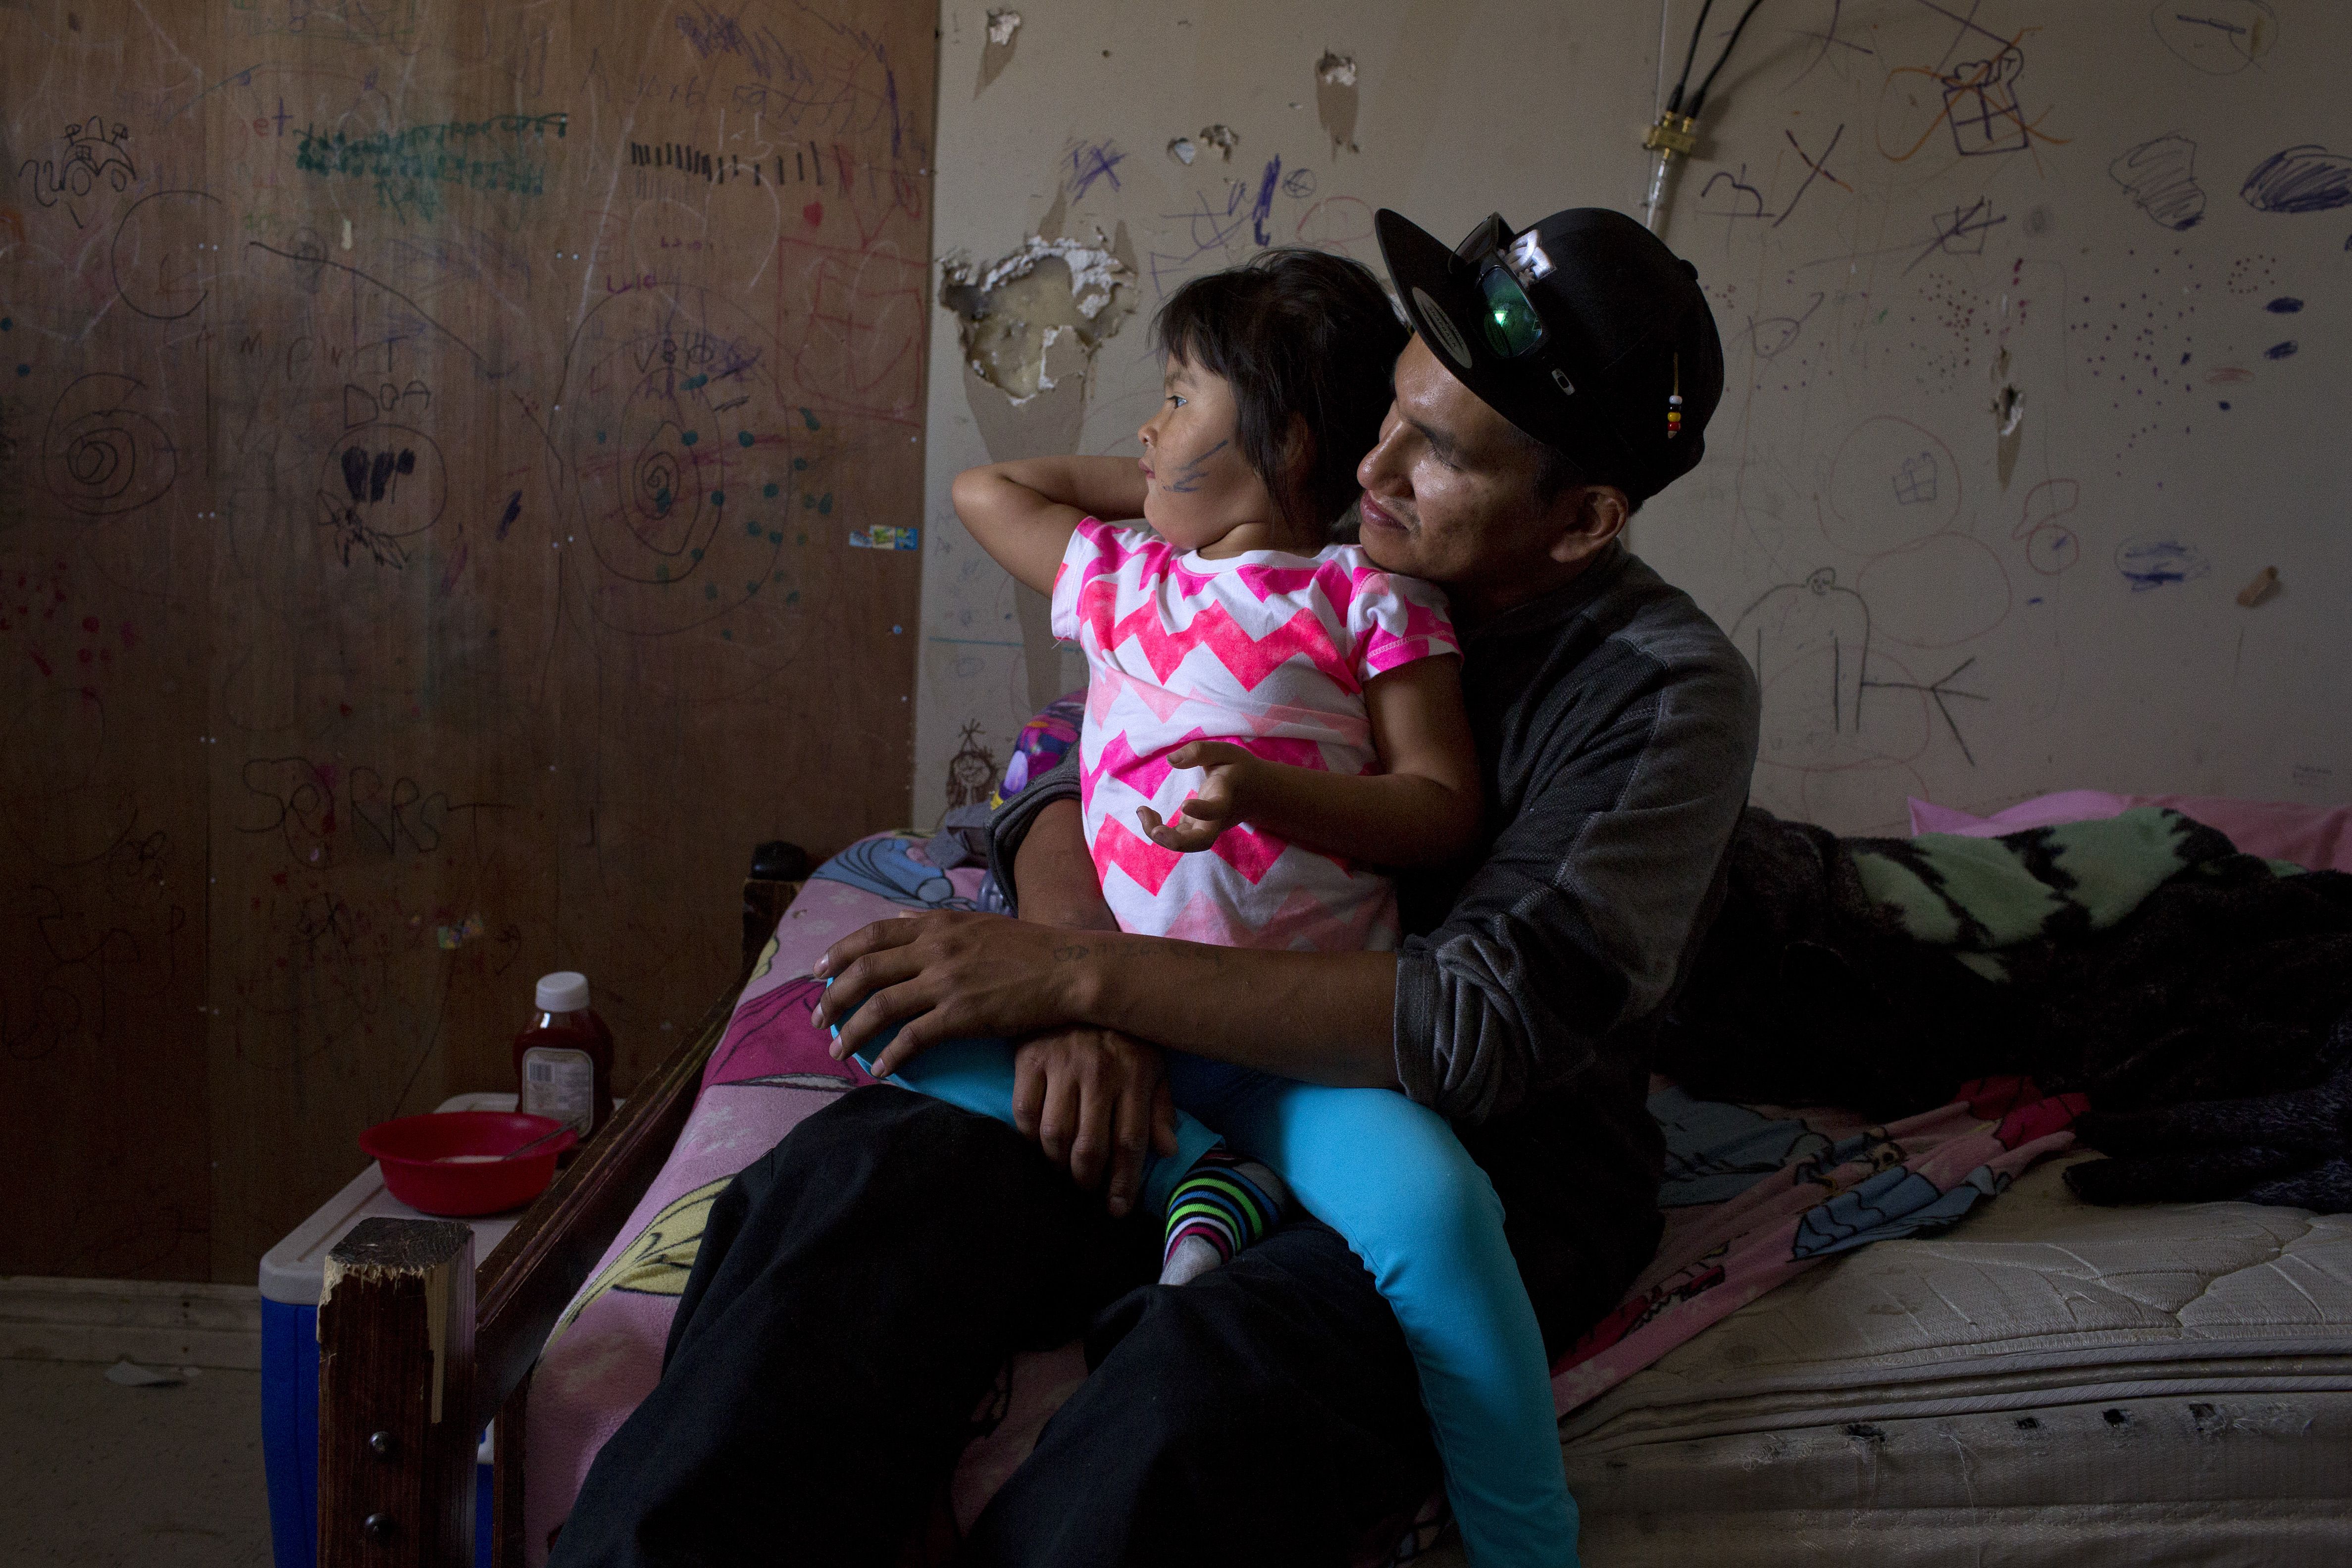 Sam Koosees sits in his bedroom with his three-year-old daughter Arianna. They share a three-bedroom trailer with ten other family members, a common situation in a community with a dire housing shortage. For Sam, a carpenter, life revolves around creating a better situation for his daughter. Despite a challenging past and the pitfalls of living in a remote, under-serviced First Nations community, he has goals and dreams for them both. While spending time with Sam, I became acutley aware of the stereotyped view of young First Nations men I was used to seeing in the media. I met several other caring fathers while I was there and cannot help but wonder how a stereotyped view of First Nations people in general exacerbates the issues they face. Image by David Maurice Smith. Canada, 2016.